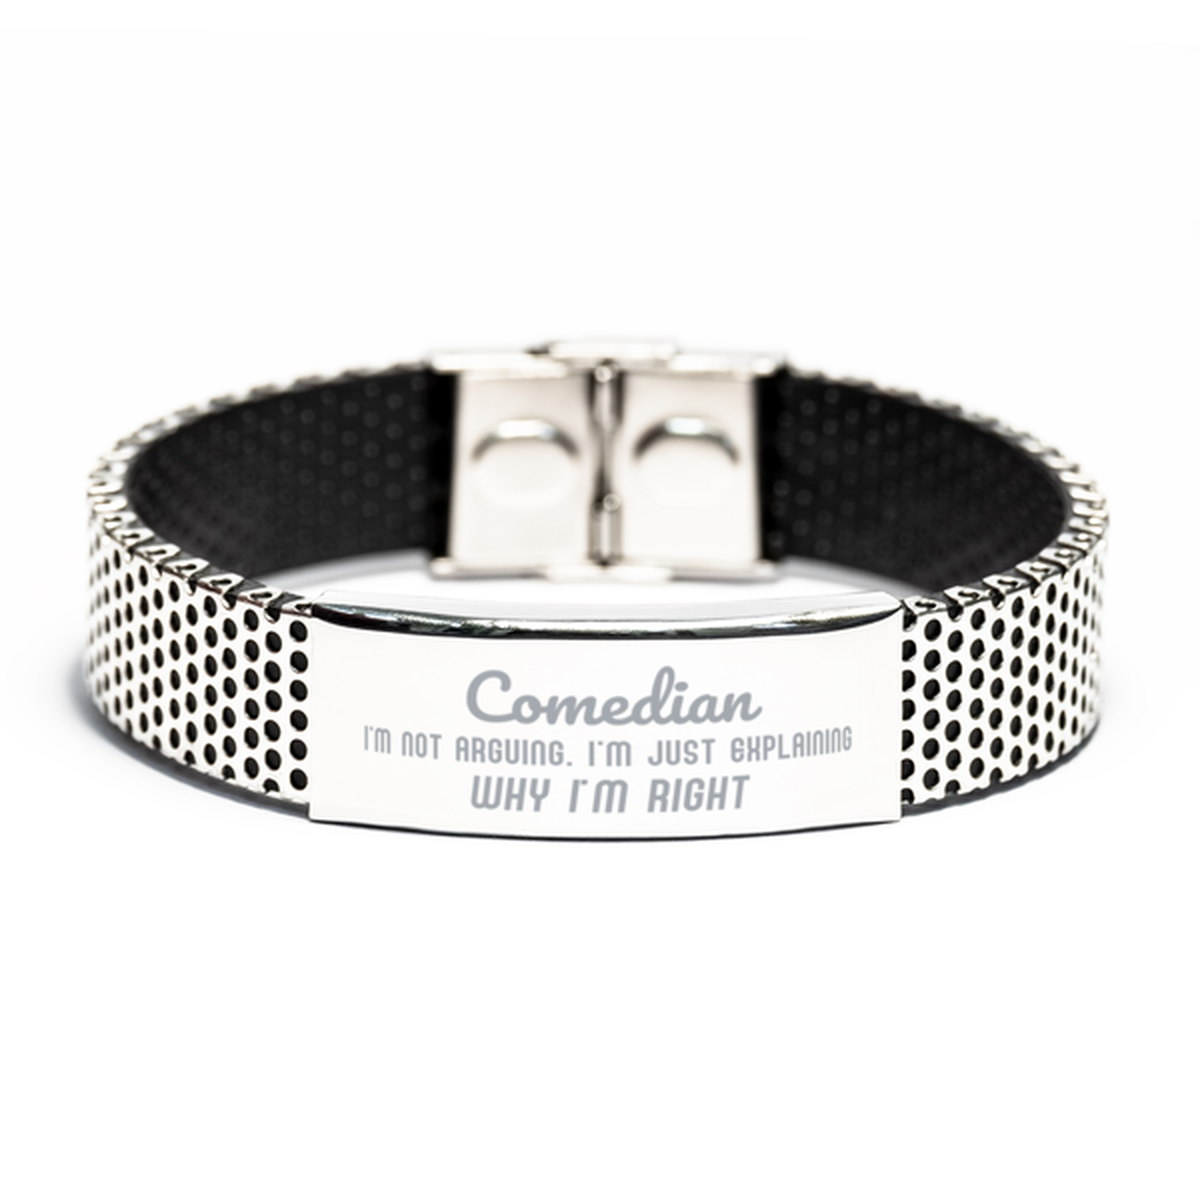 Comedian I'm not Arguing. I'm Just Explaining Why I'm RIGHT Stainless Steel Bracelet, Funny Saying Quote Comedian Gifts For Comedian Graduation Birthday Christmas Gifts for Men Women Coworker